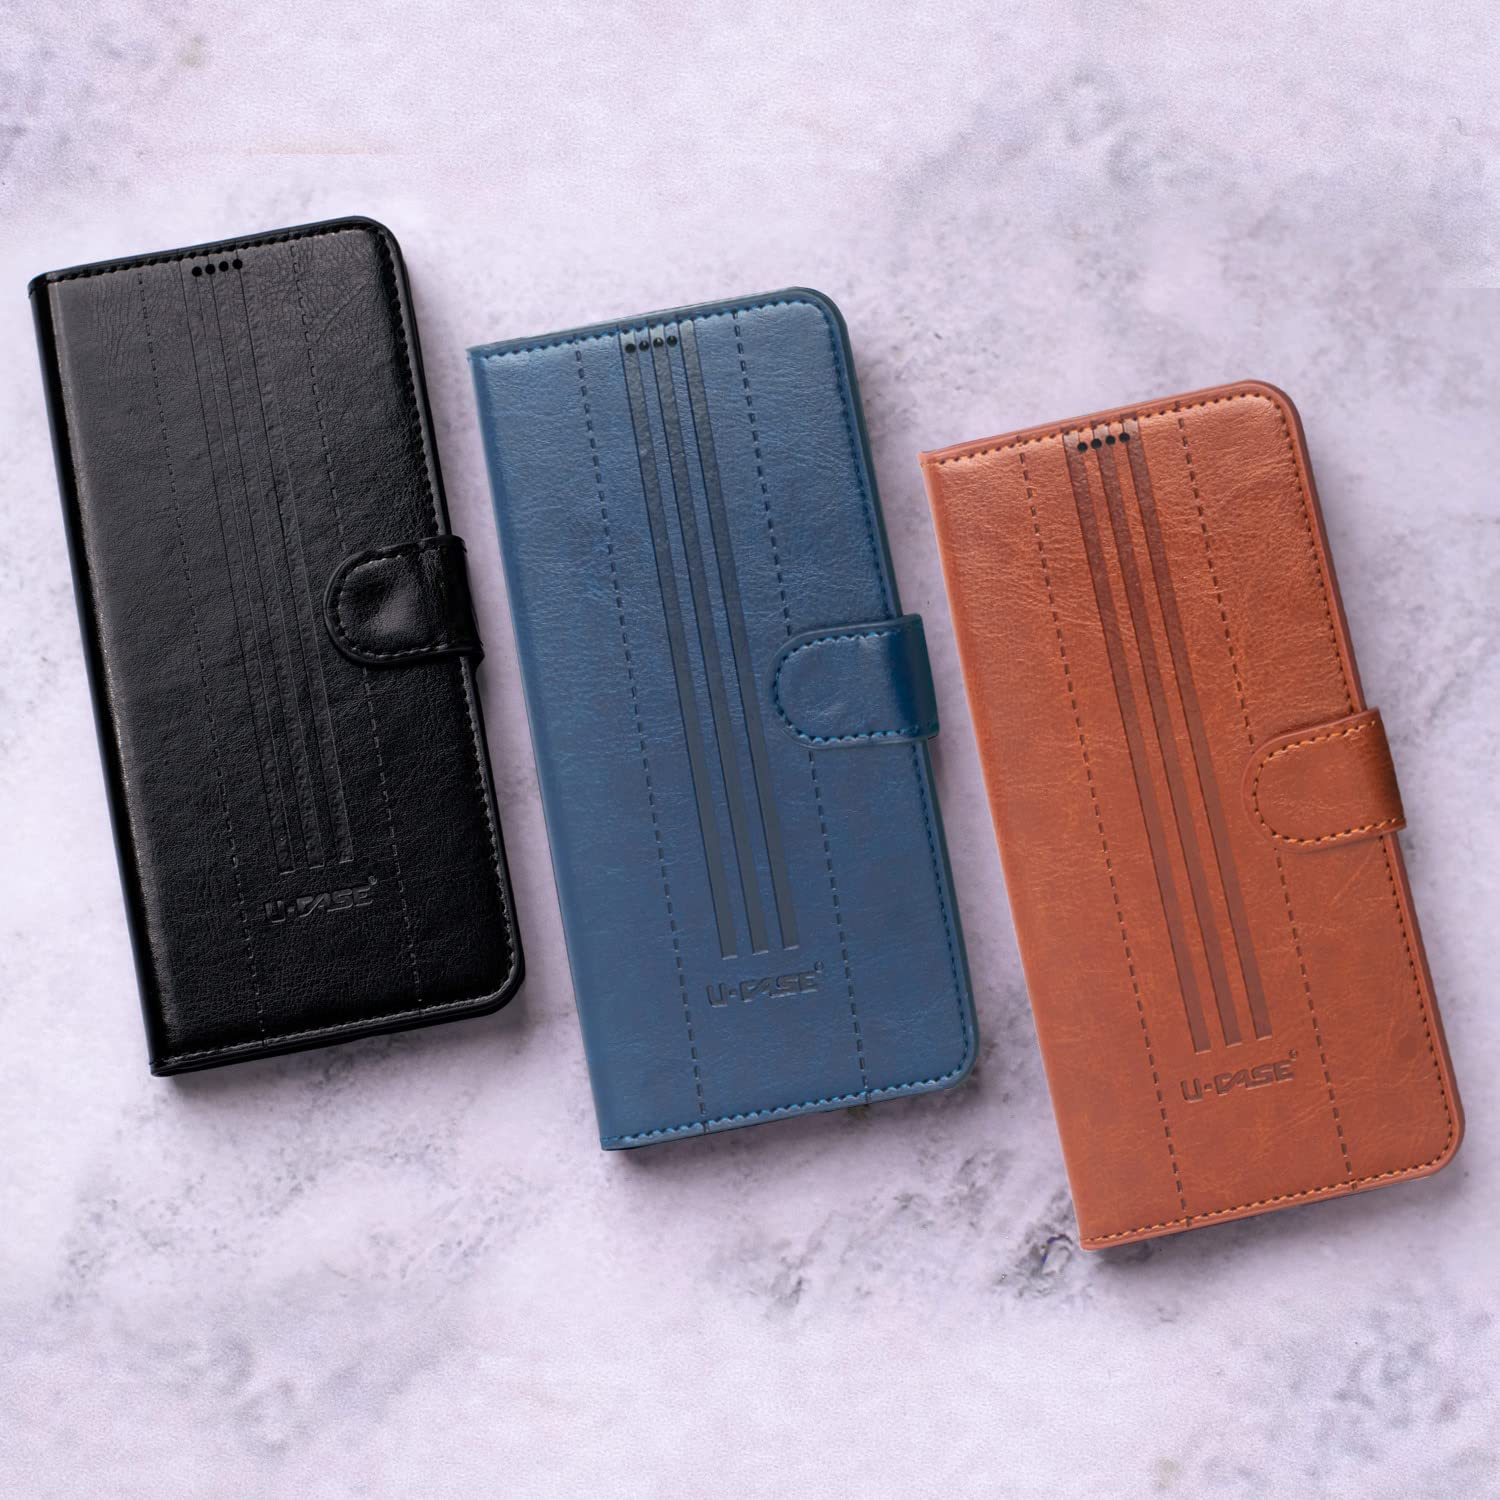 U-CASE Flip Cover for OnePlus Nord Vegan Foldable Stand & Pocket Magnetic Closure colors